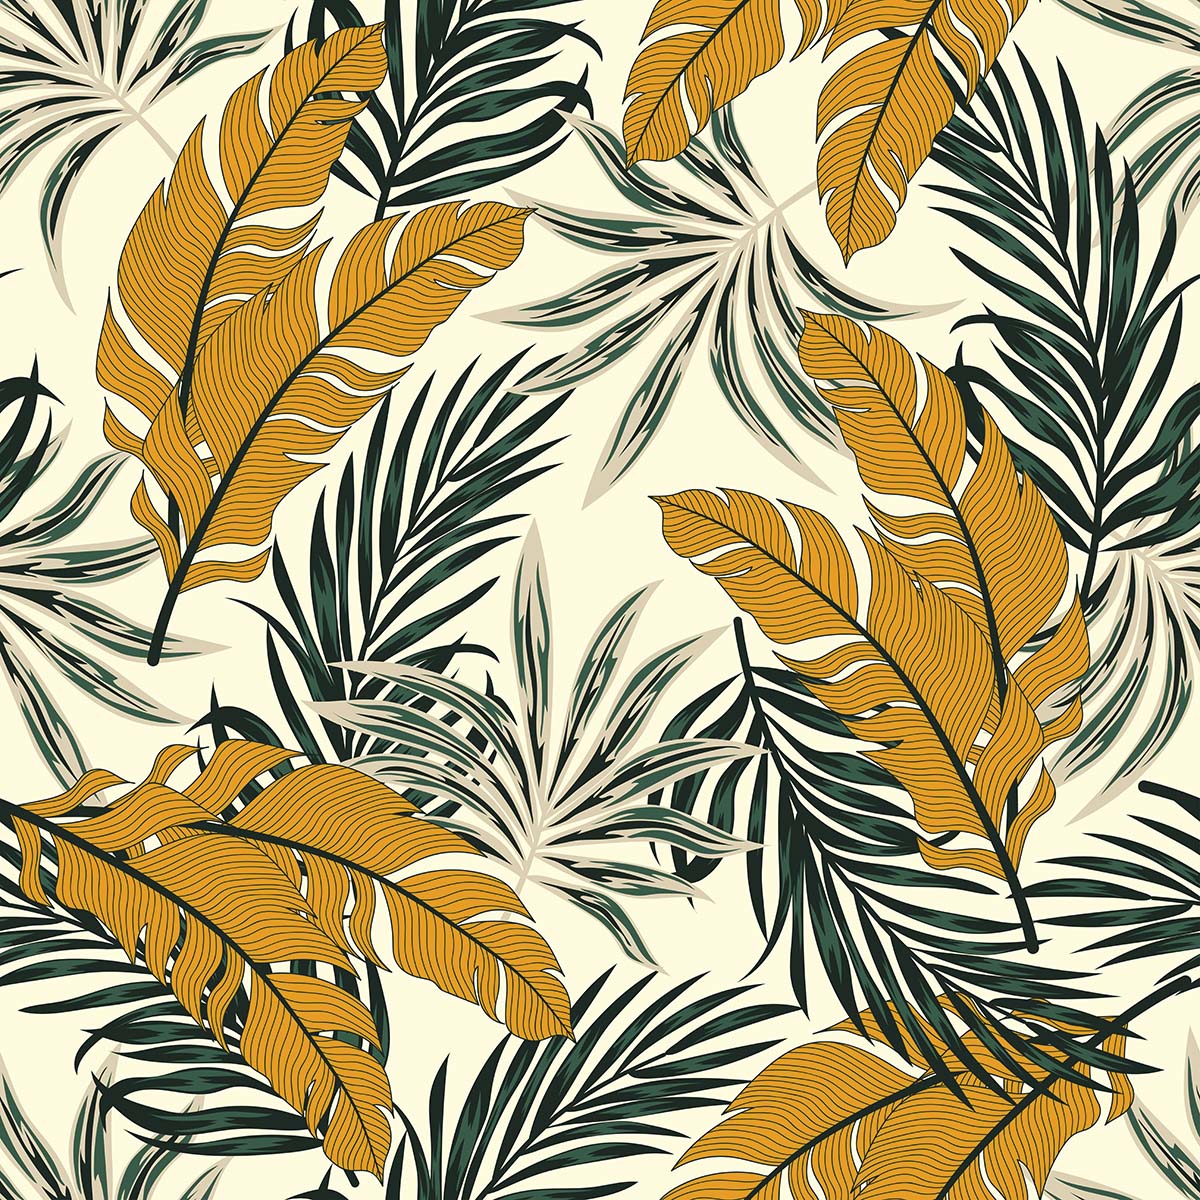 A pattern of leaves and plants